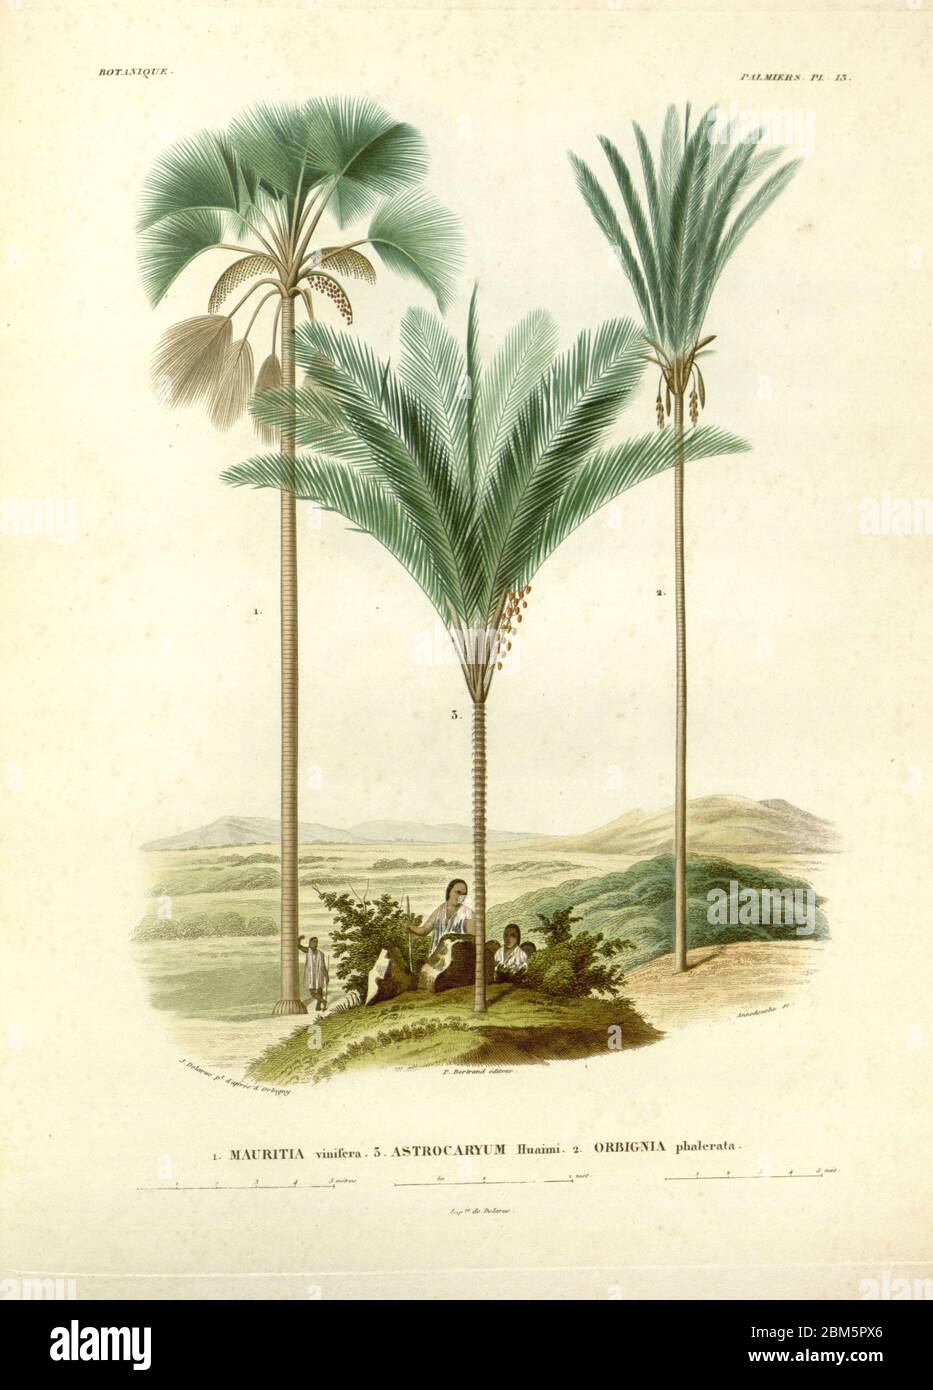 Palm trees and indigenous people of South America From the book 'Voyage dans l'Amérique Méridionale' [Journey to South America: (Brazil, the eastern republic of Uruguay, the Argentine Republic, Patagonia, the republic of Chile, the republic of Bolivia, the republic of Peru), executed during the years 1826 - 1833] By: Orbigny, Alcide Dessalines d', 1802-1857; Montagne, Jean François Camille, 1784-1866; Martius, Karl Friedrich Philipp von, 1794-1868 Published Paris :Chez Pitois-Levrault et c.e ... ;1835-1847 Stock Photo